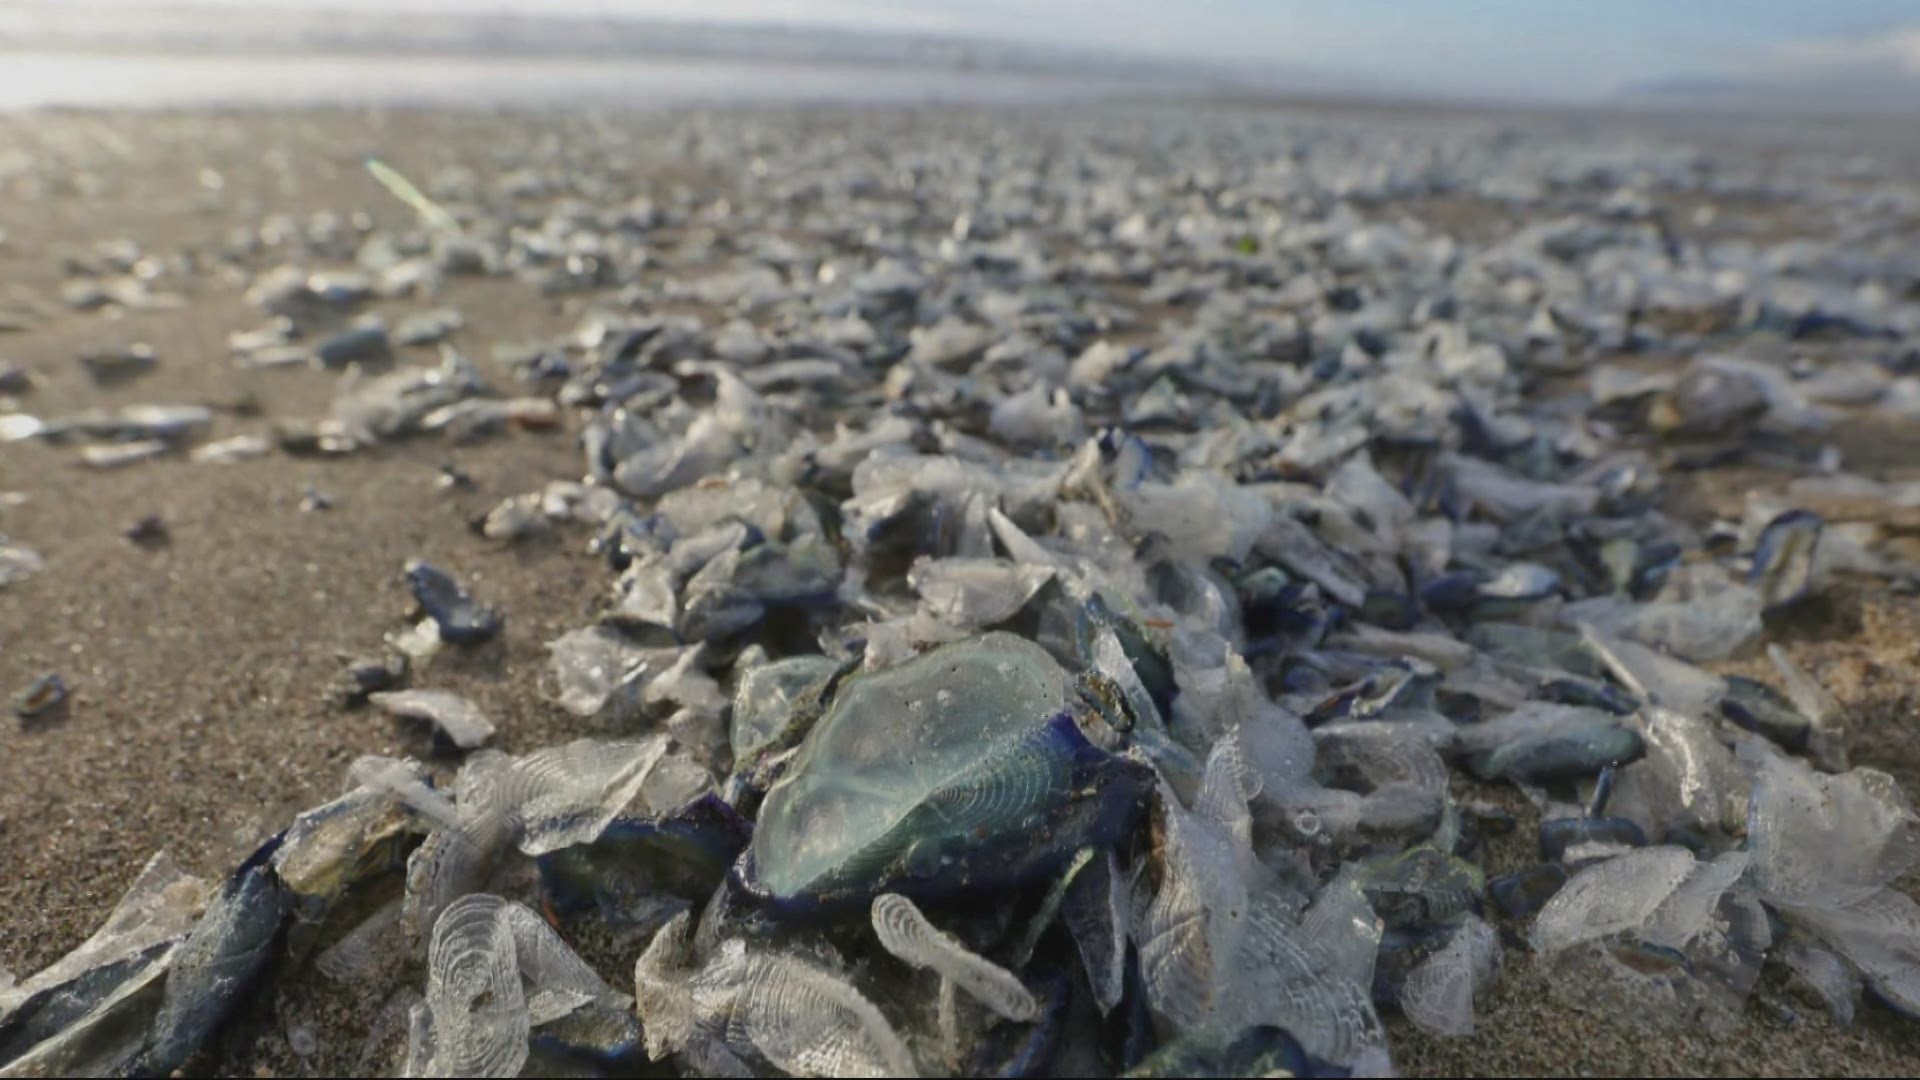 Have you seen those purple jellyfish-like creatures on the beach? As Keely Chalmers reports, research shows those mass strandings are tied to warmer oceans.